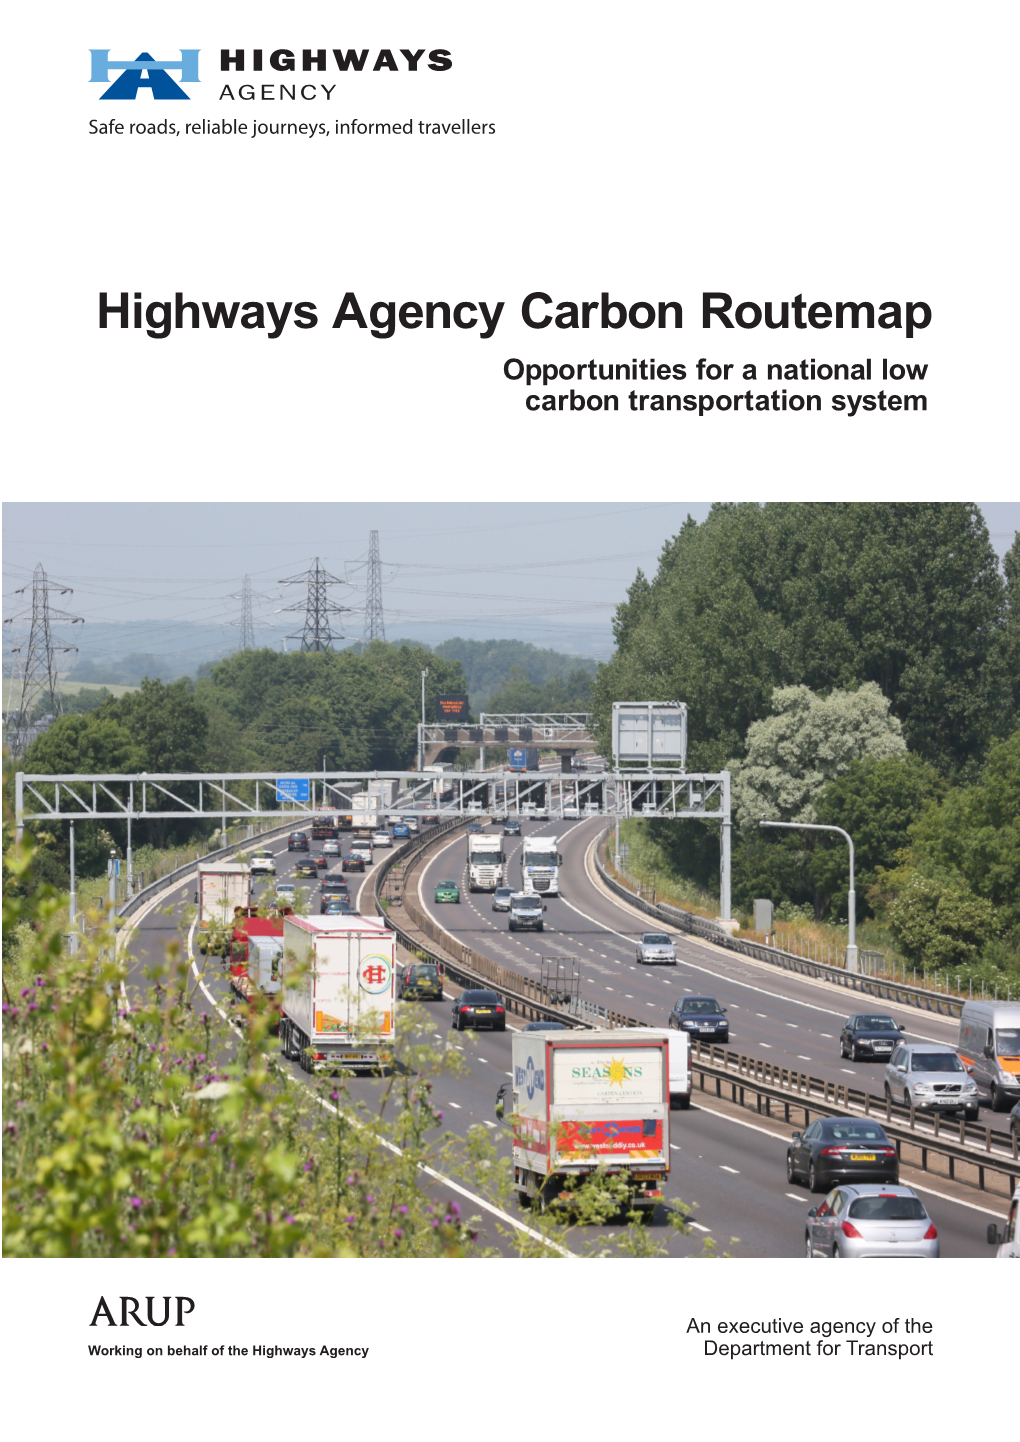 Highways Agency Carbon Routemap Opportunities for a National Low Carbon Transportation System